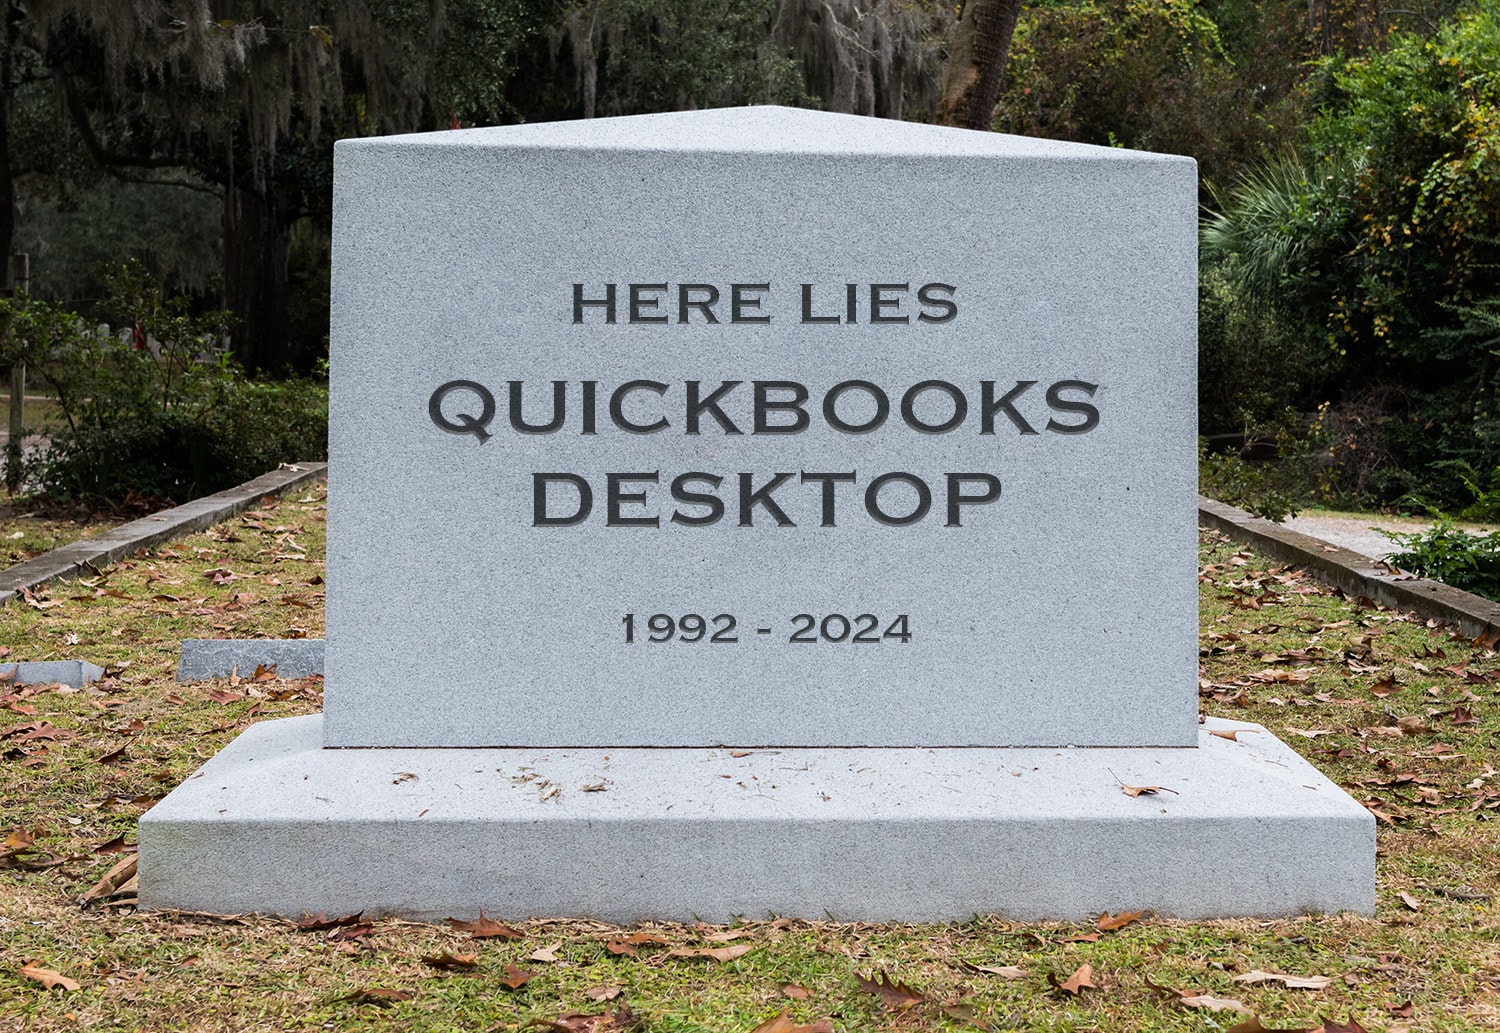 Is QuickBooks Desktop Being Phased Out? – Your FAQs Answered